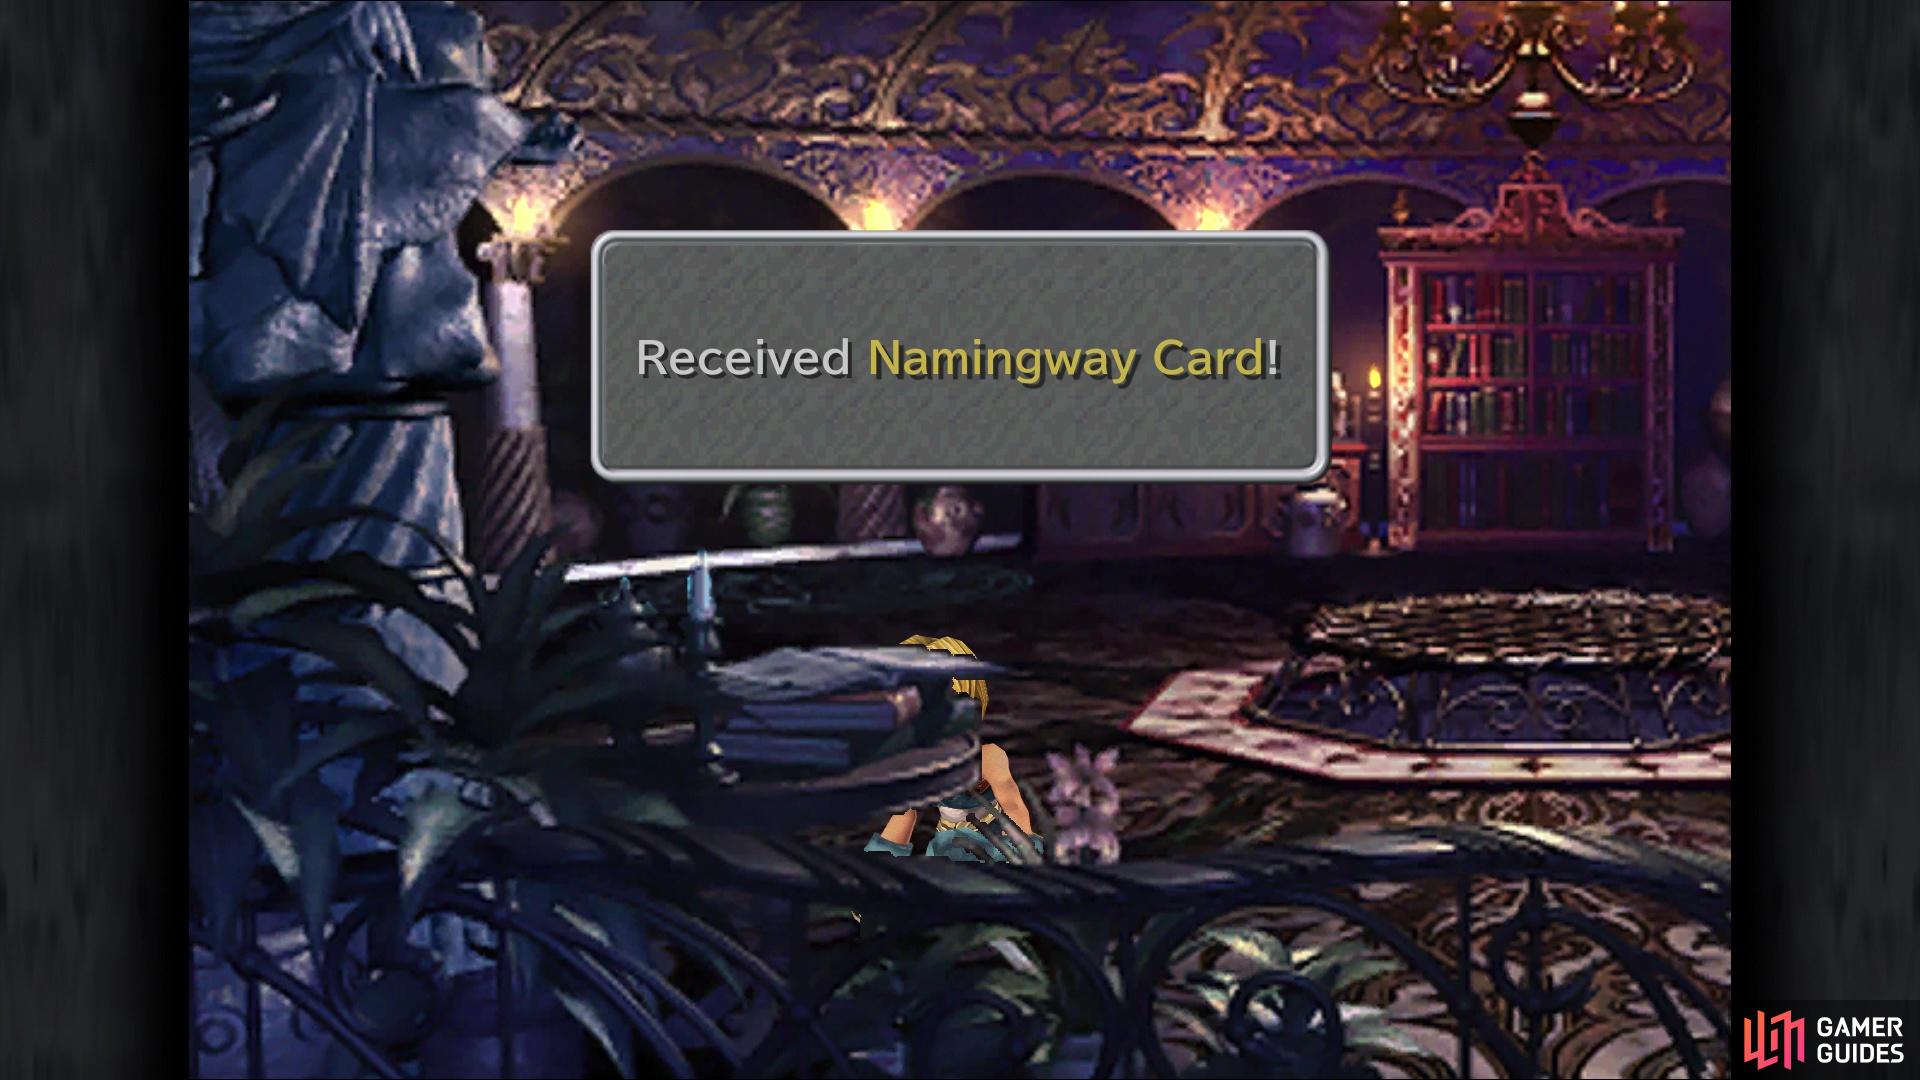 Don’t forget to pick up the Namingway Card in Kuja’s room before leaving